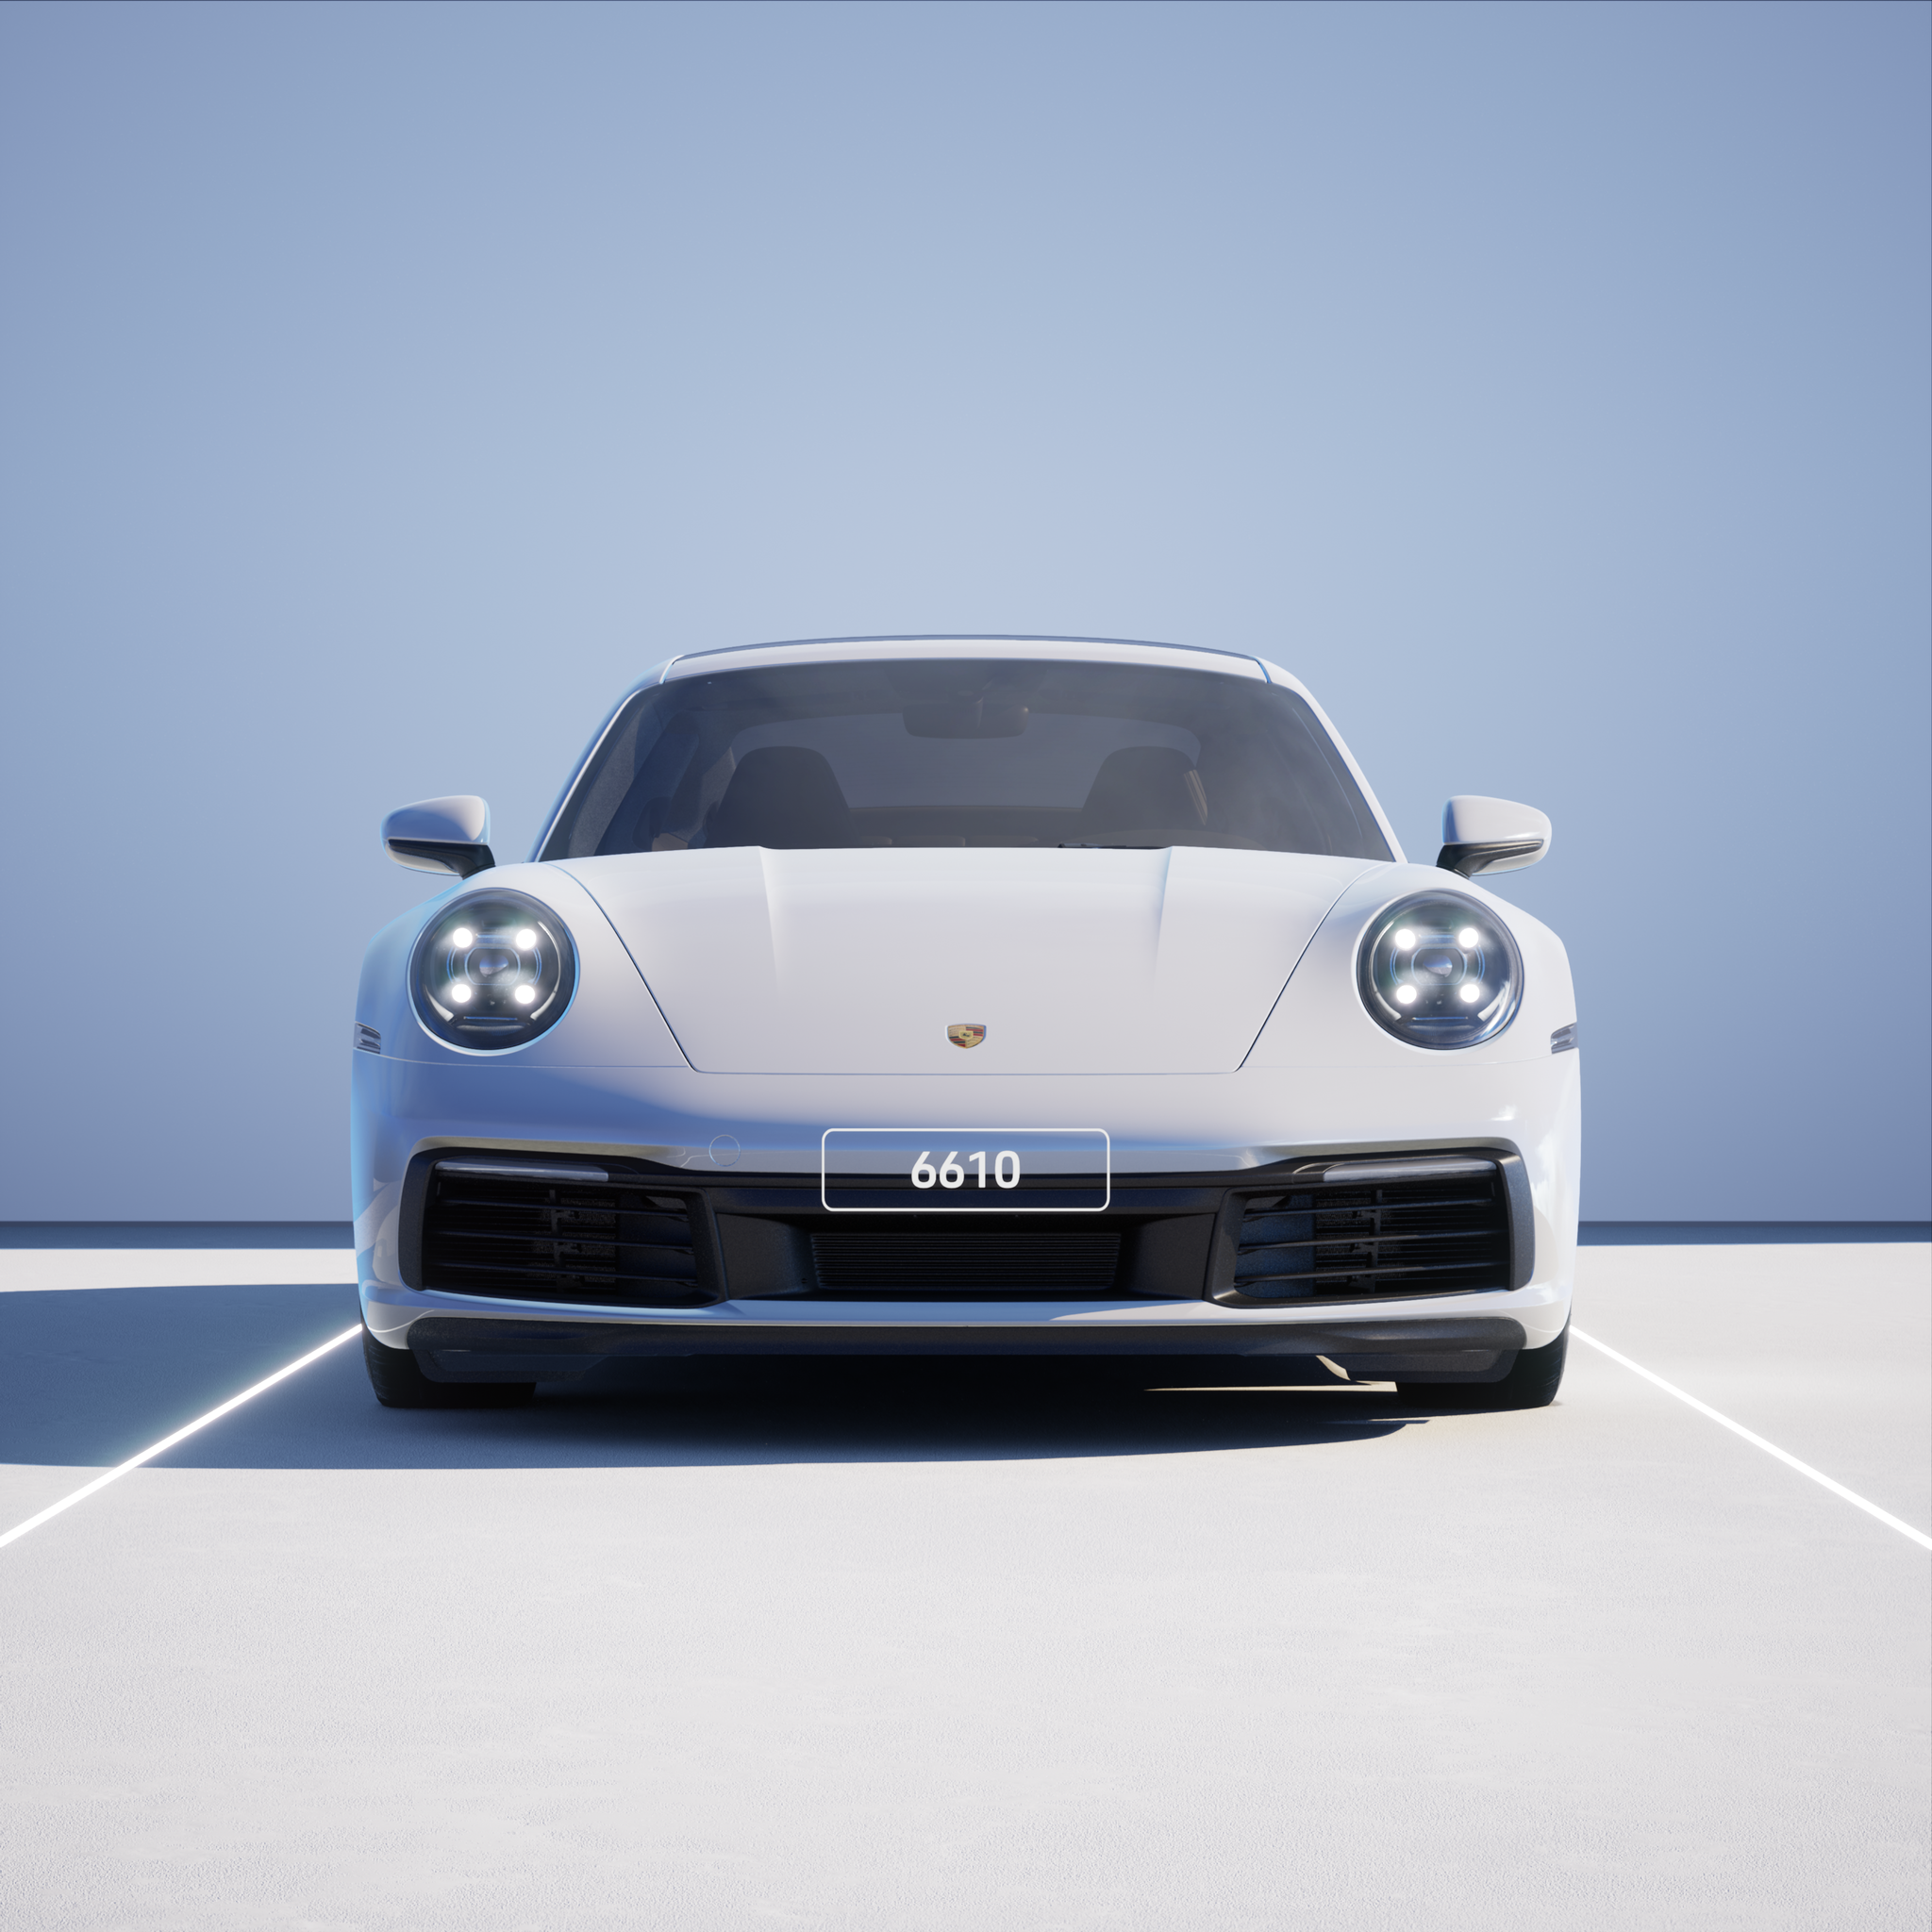 The PORSCHΞ 911 6610 image in phase